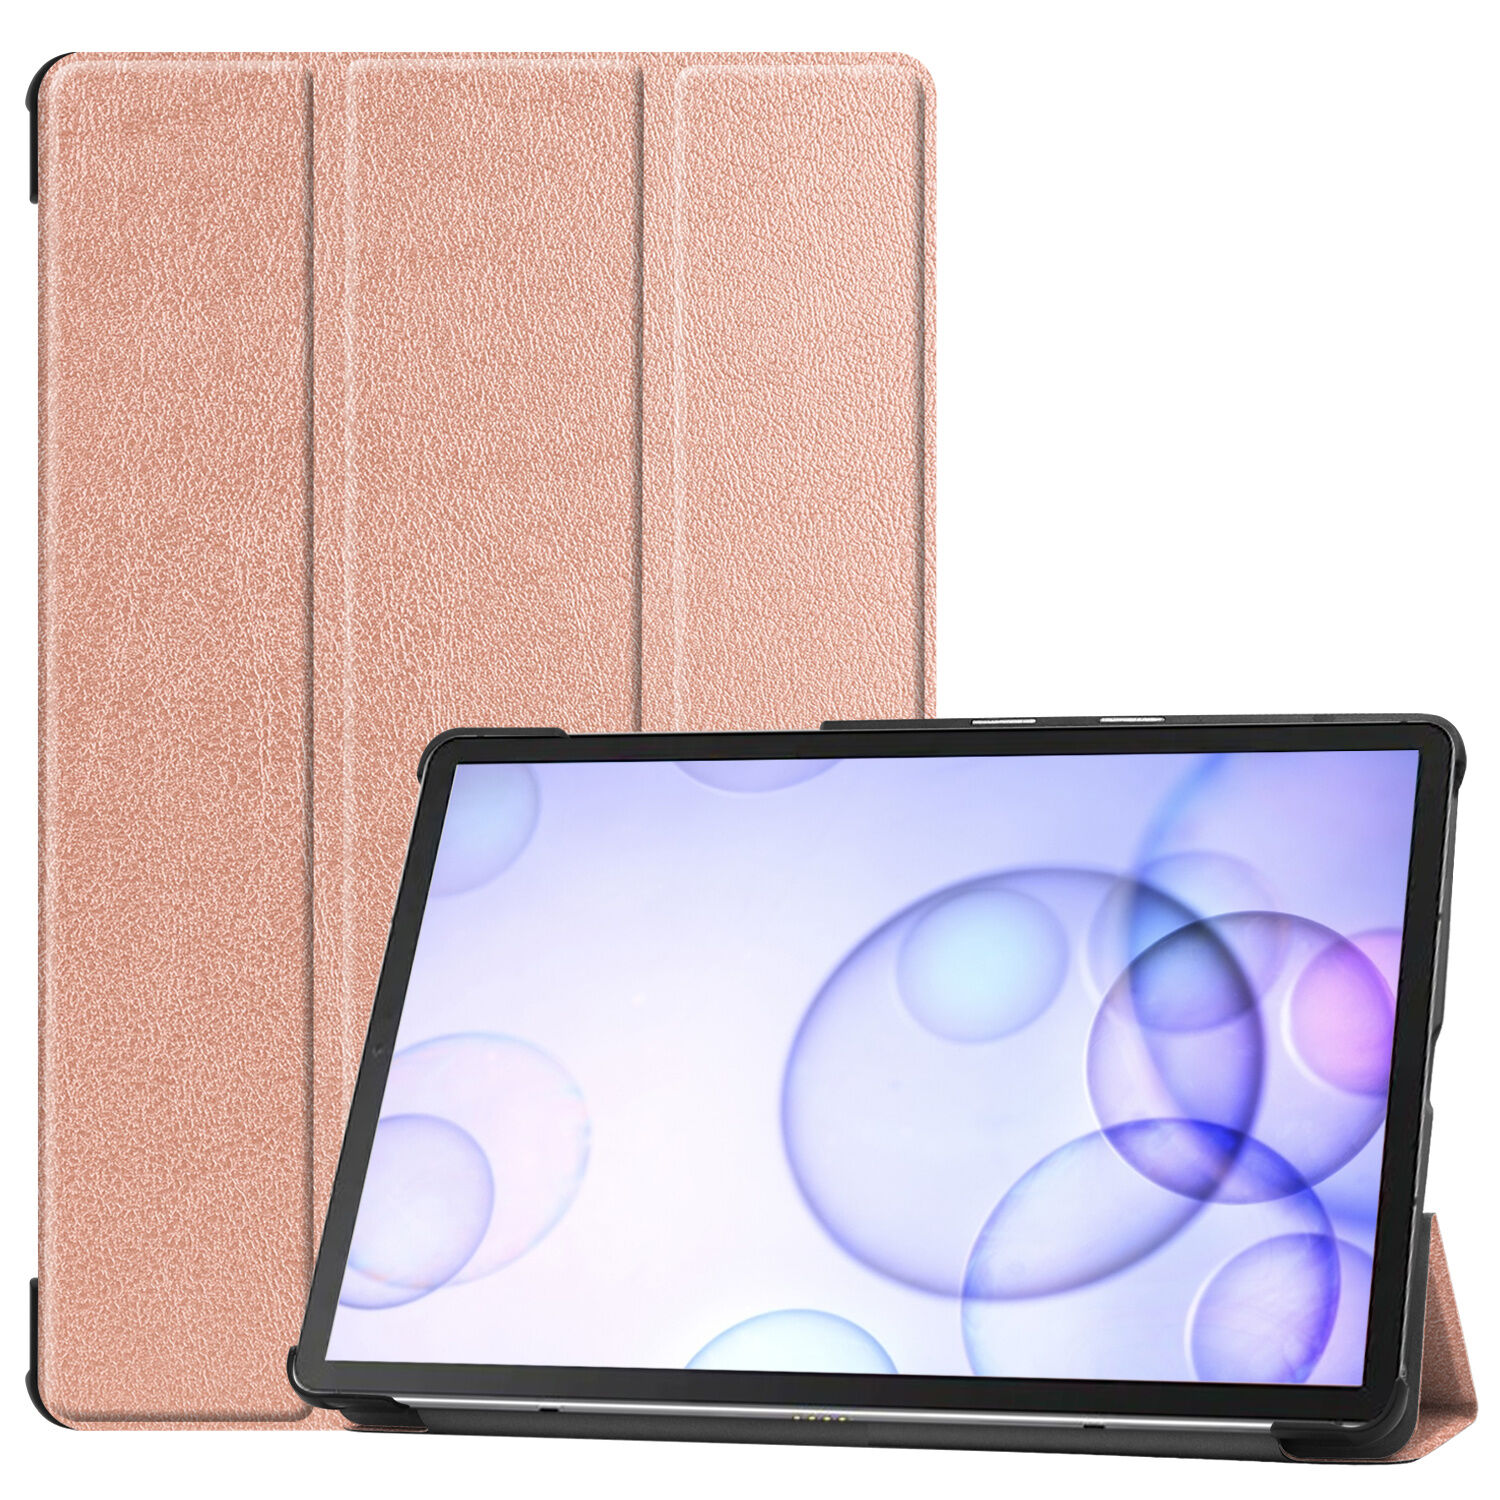 Lunso 3-Vouw sleepcover hoes Rose Goud voor de Samsung Galaxy Tab S6